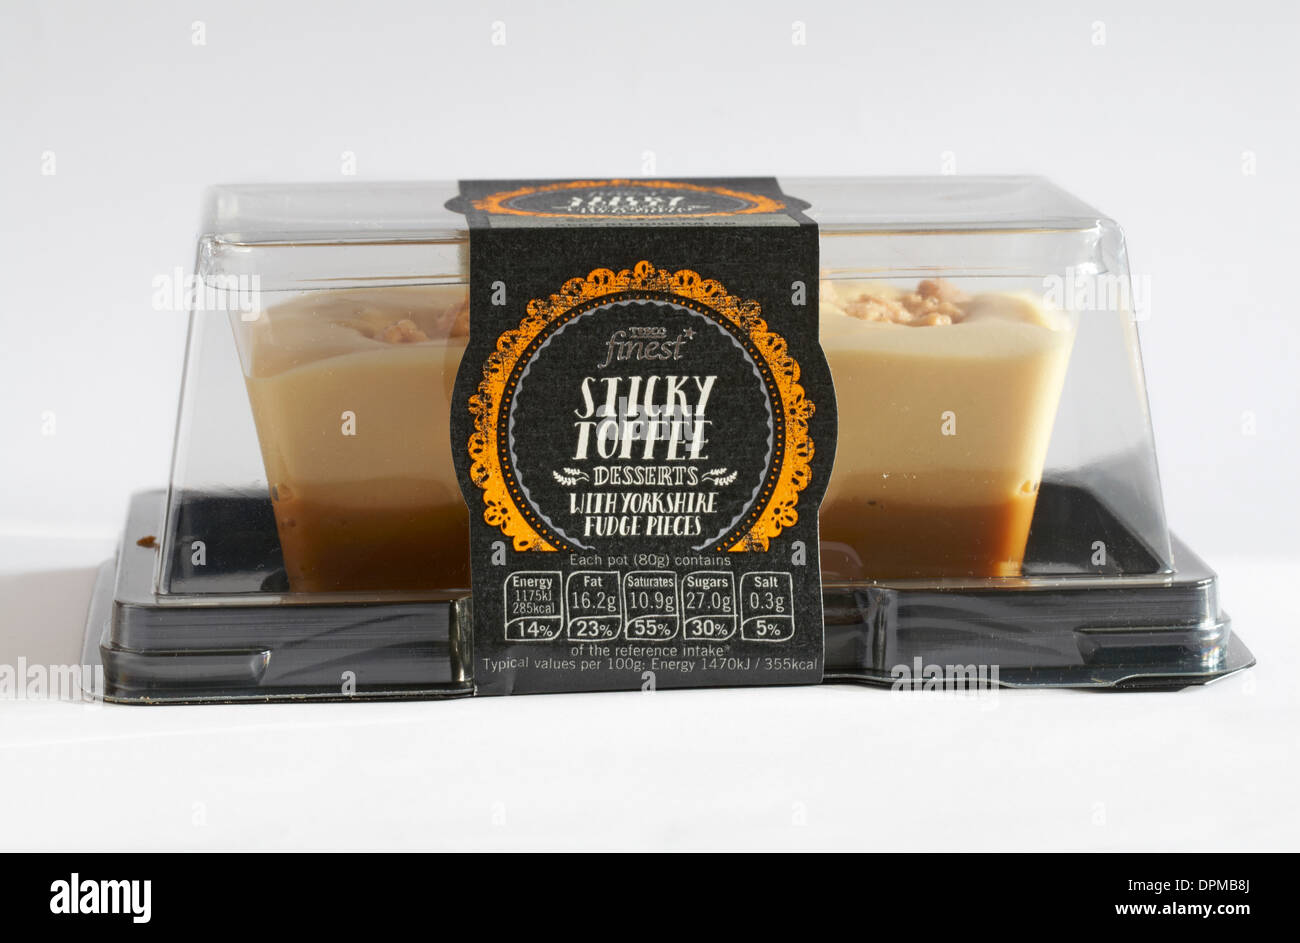 Tesco finest sticky toffee desserts with yorkshire fudge pieces ...